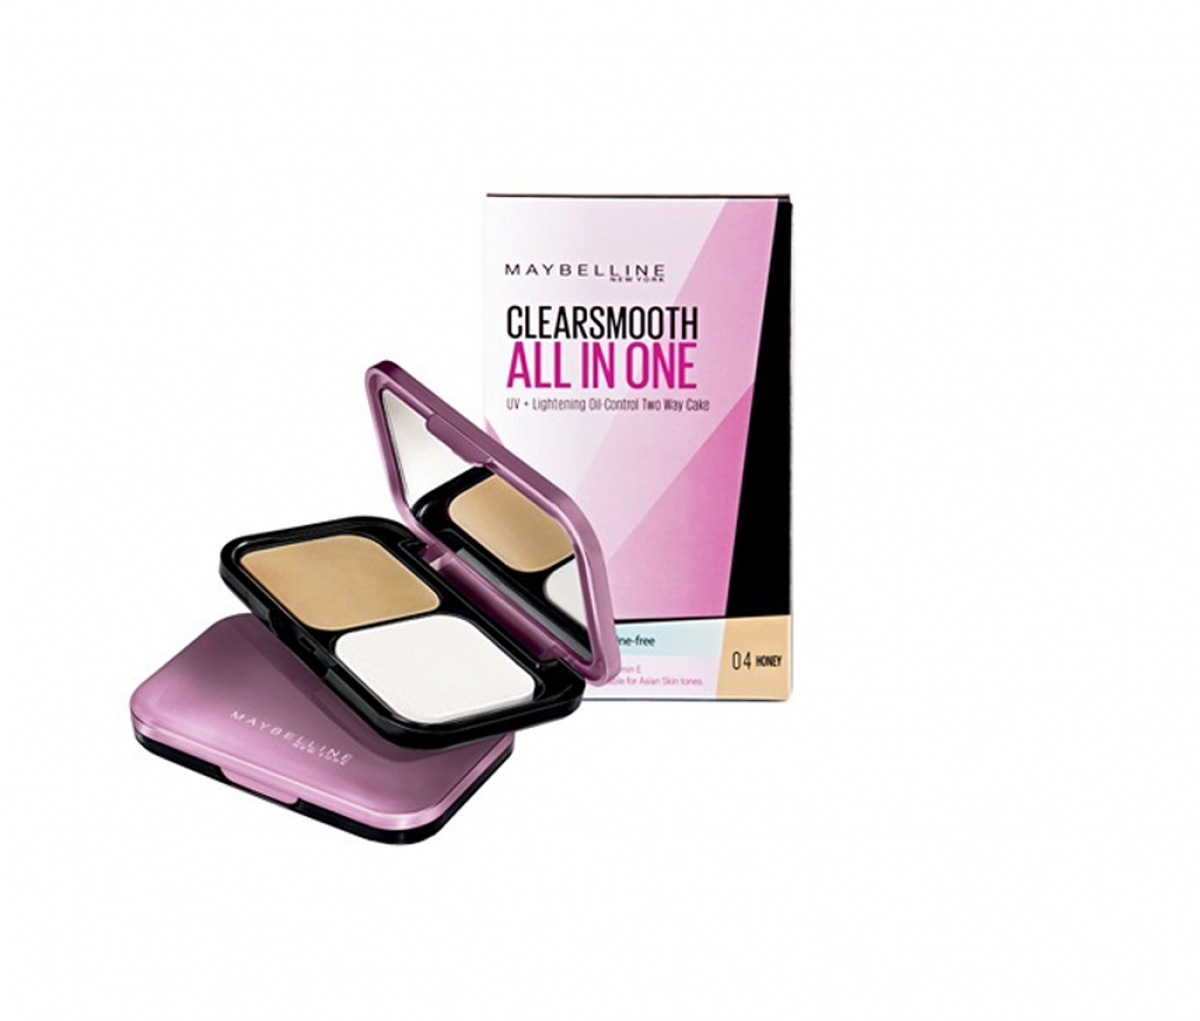 Maybelline Clearsmooth All In One Face Powder PA 04 honey